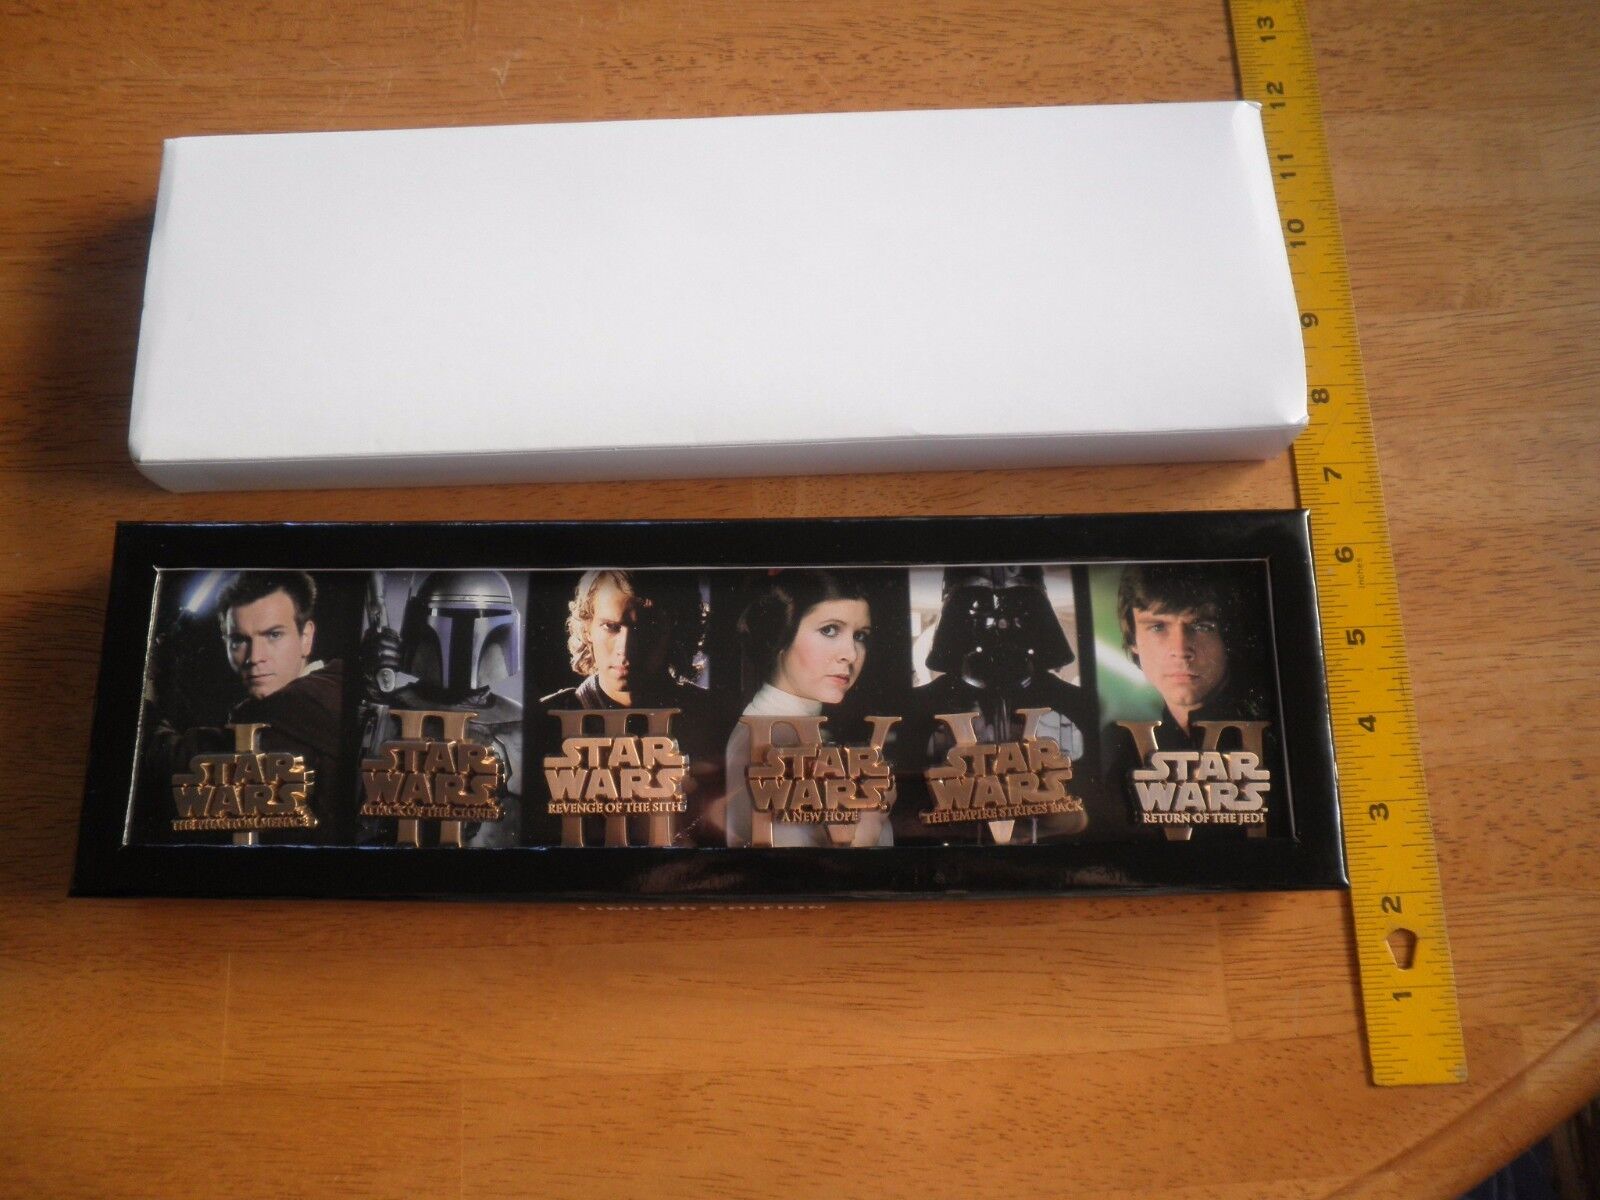 D23 Expo Exclusive 2015 Star Wars Episodes Boxed Pin Set LE 500 IN HAND SOLD OUT